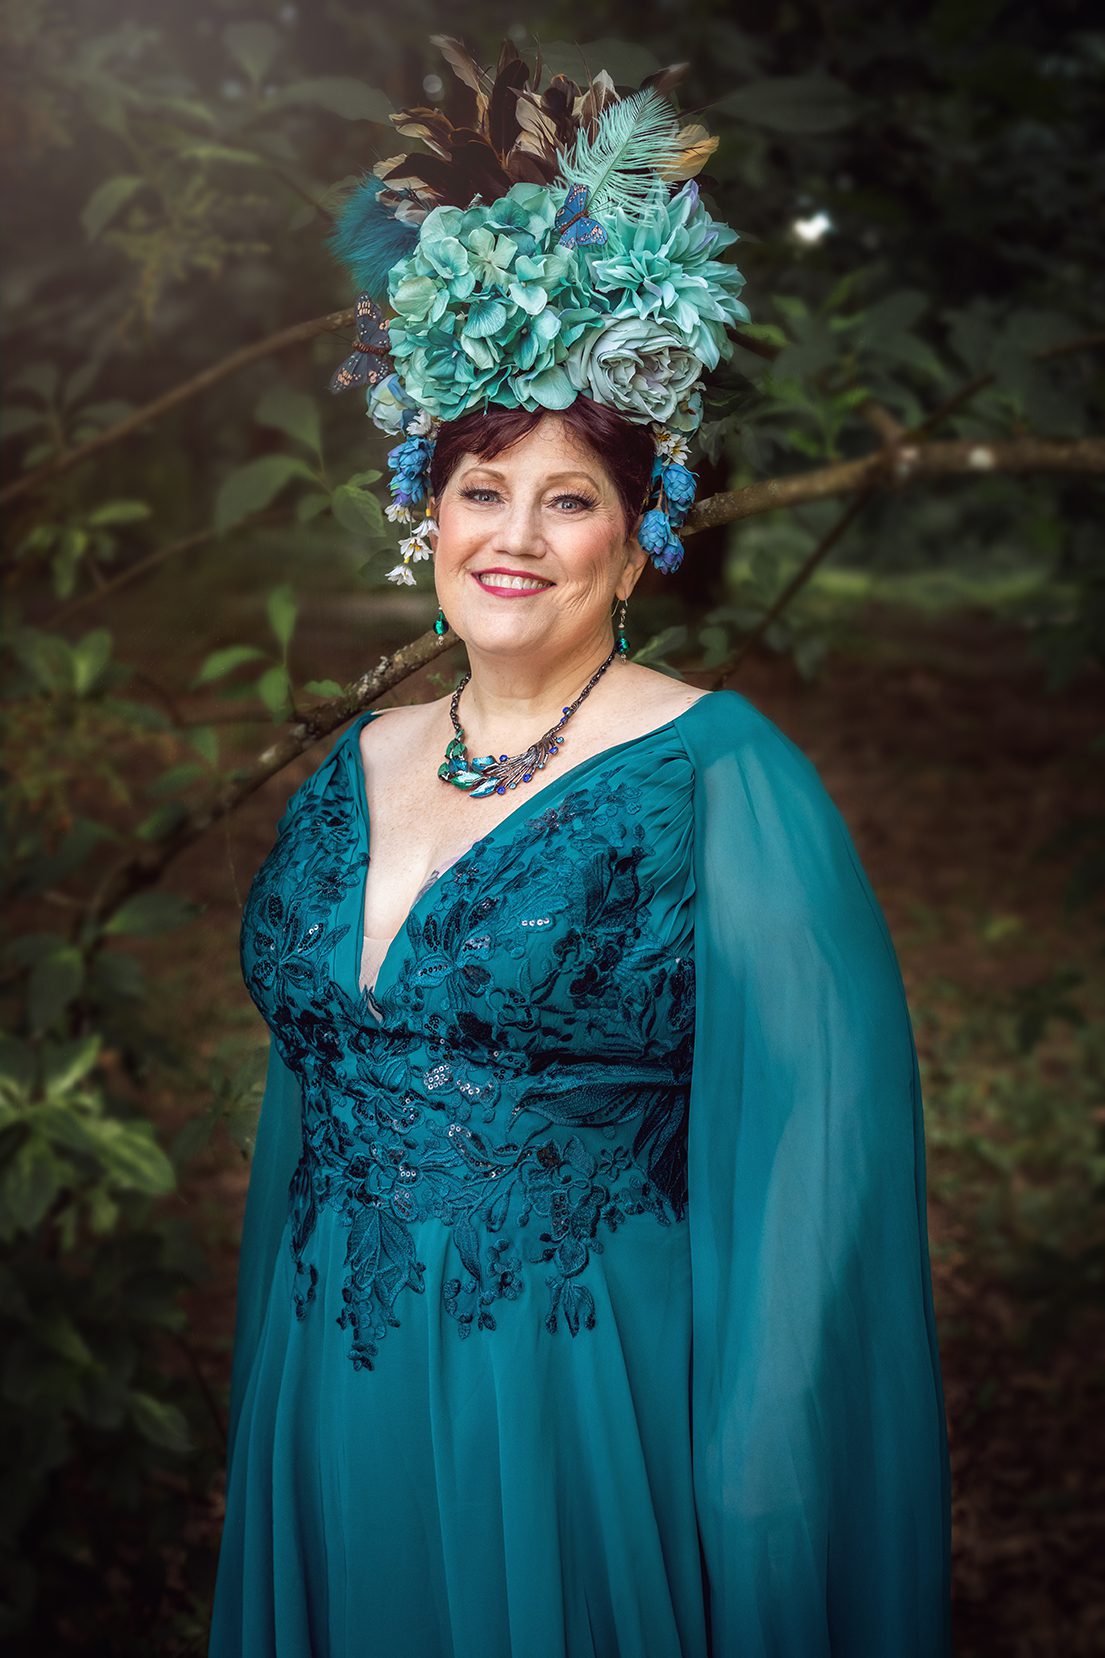 Over 50 woman in gown and head piece in western washington forest for juniper Lynne photography.